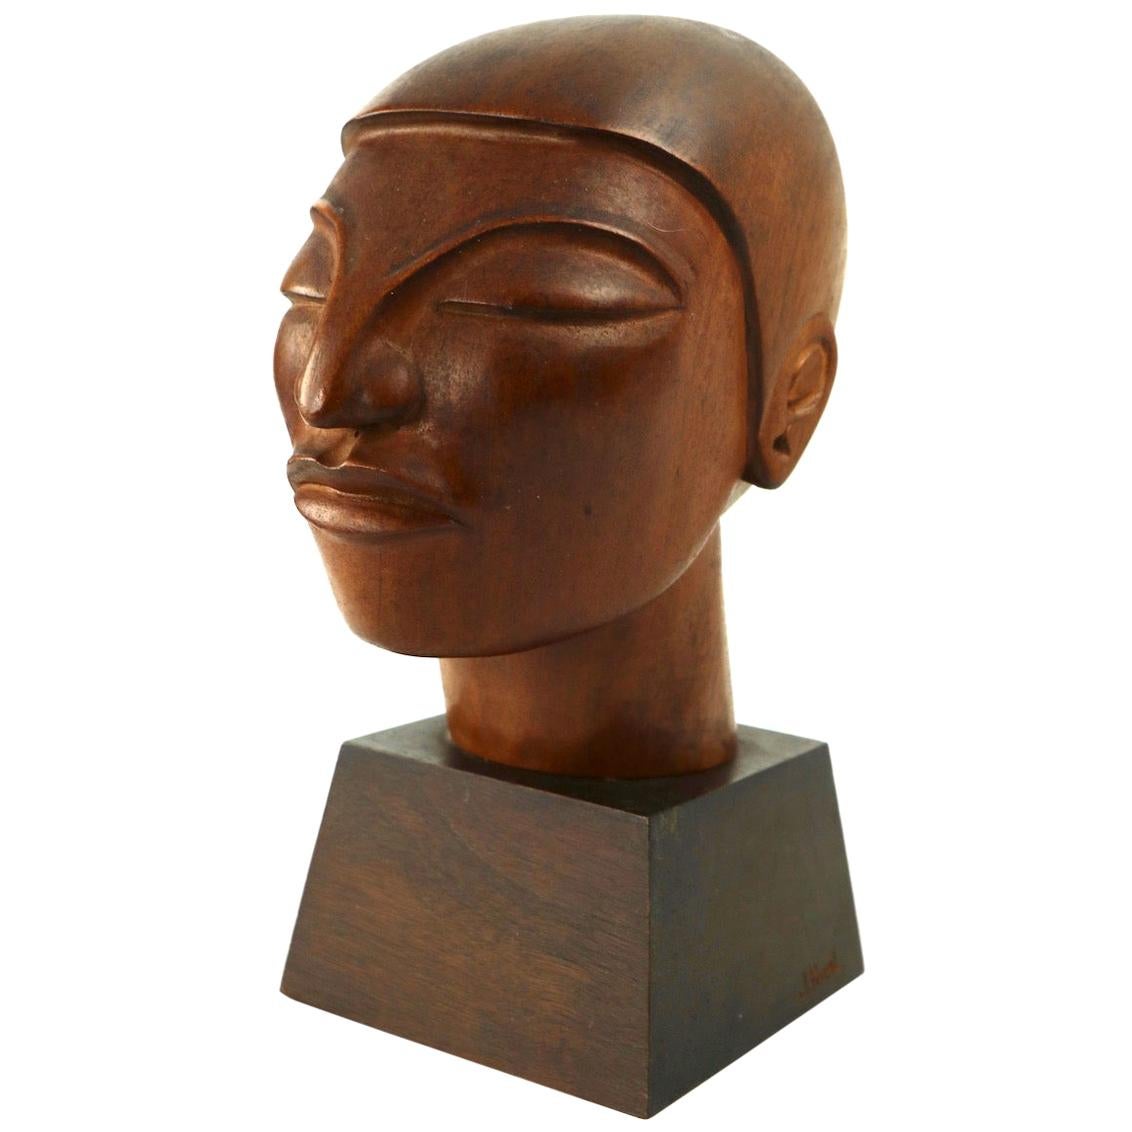 Carved Wood Sculpture by J. Pinal